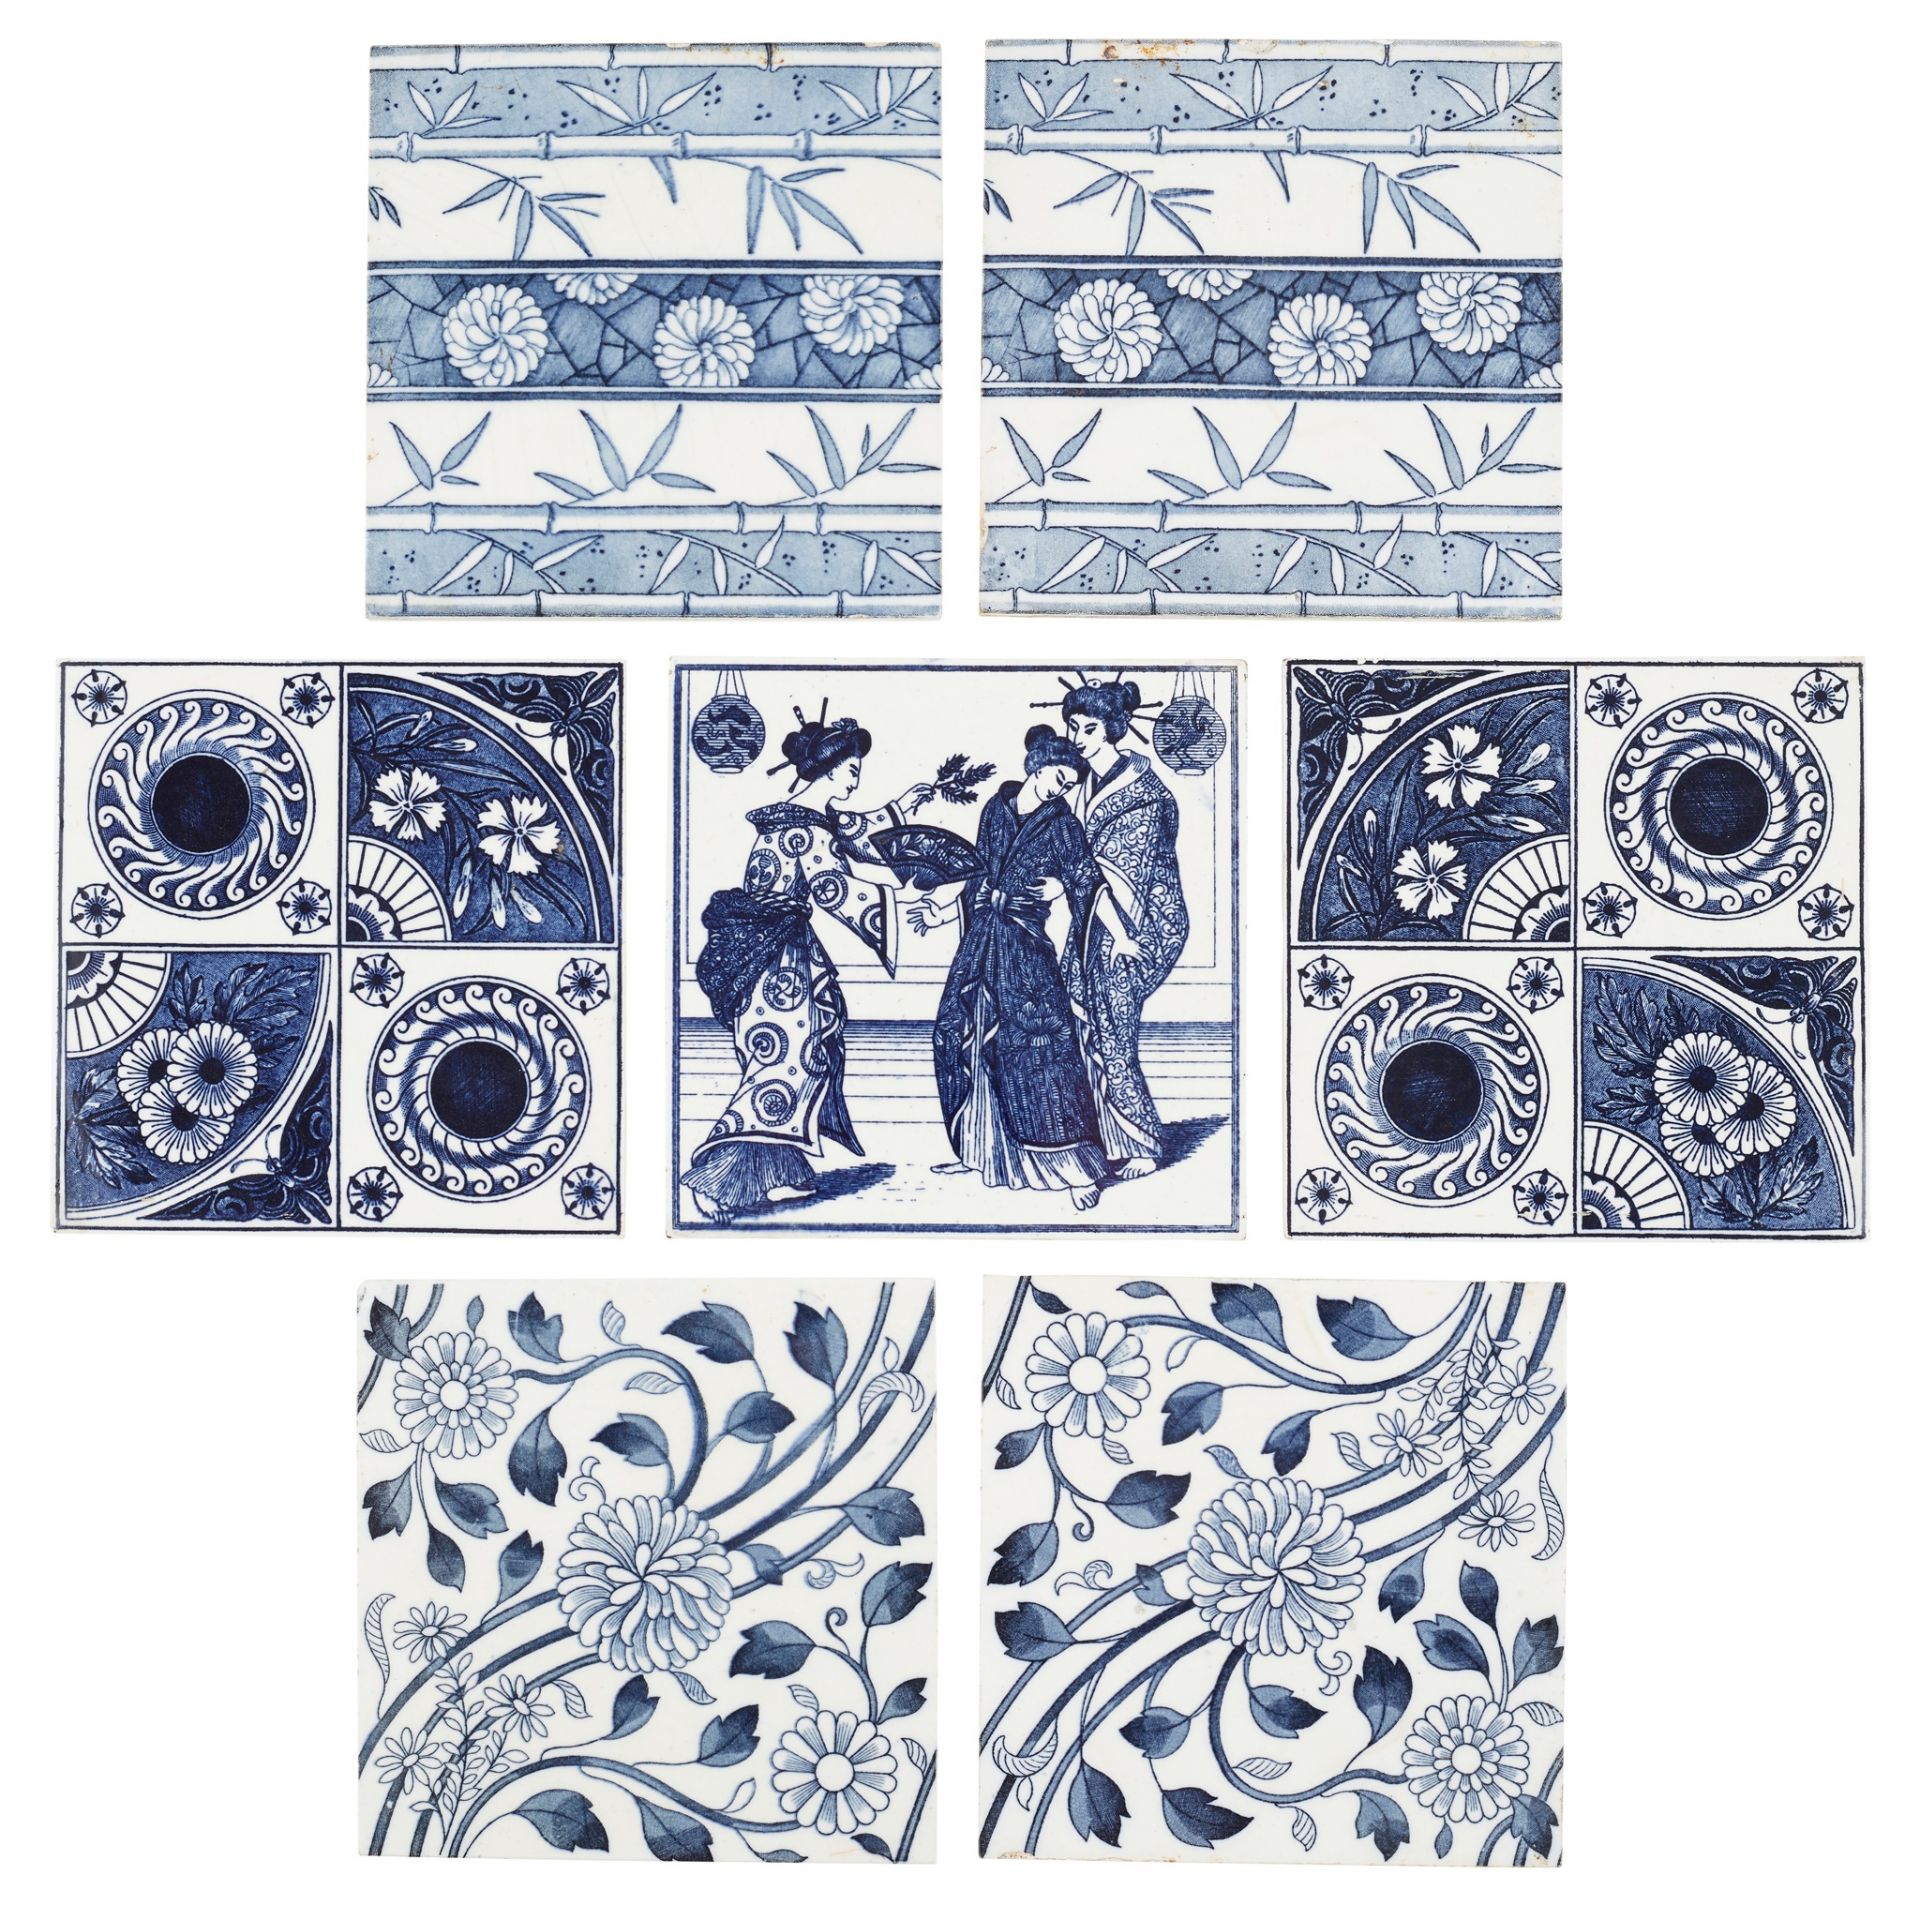 MINTON'S CHINA WORKS AND MAW & CO. GROUP OF SEVEN AESTHETIC MOVEMENT WALL TILES, CIRCA 1880